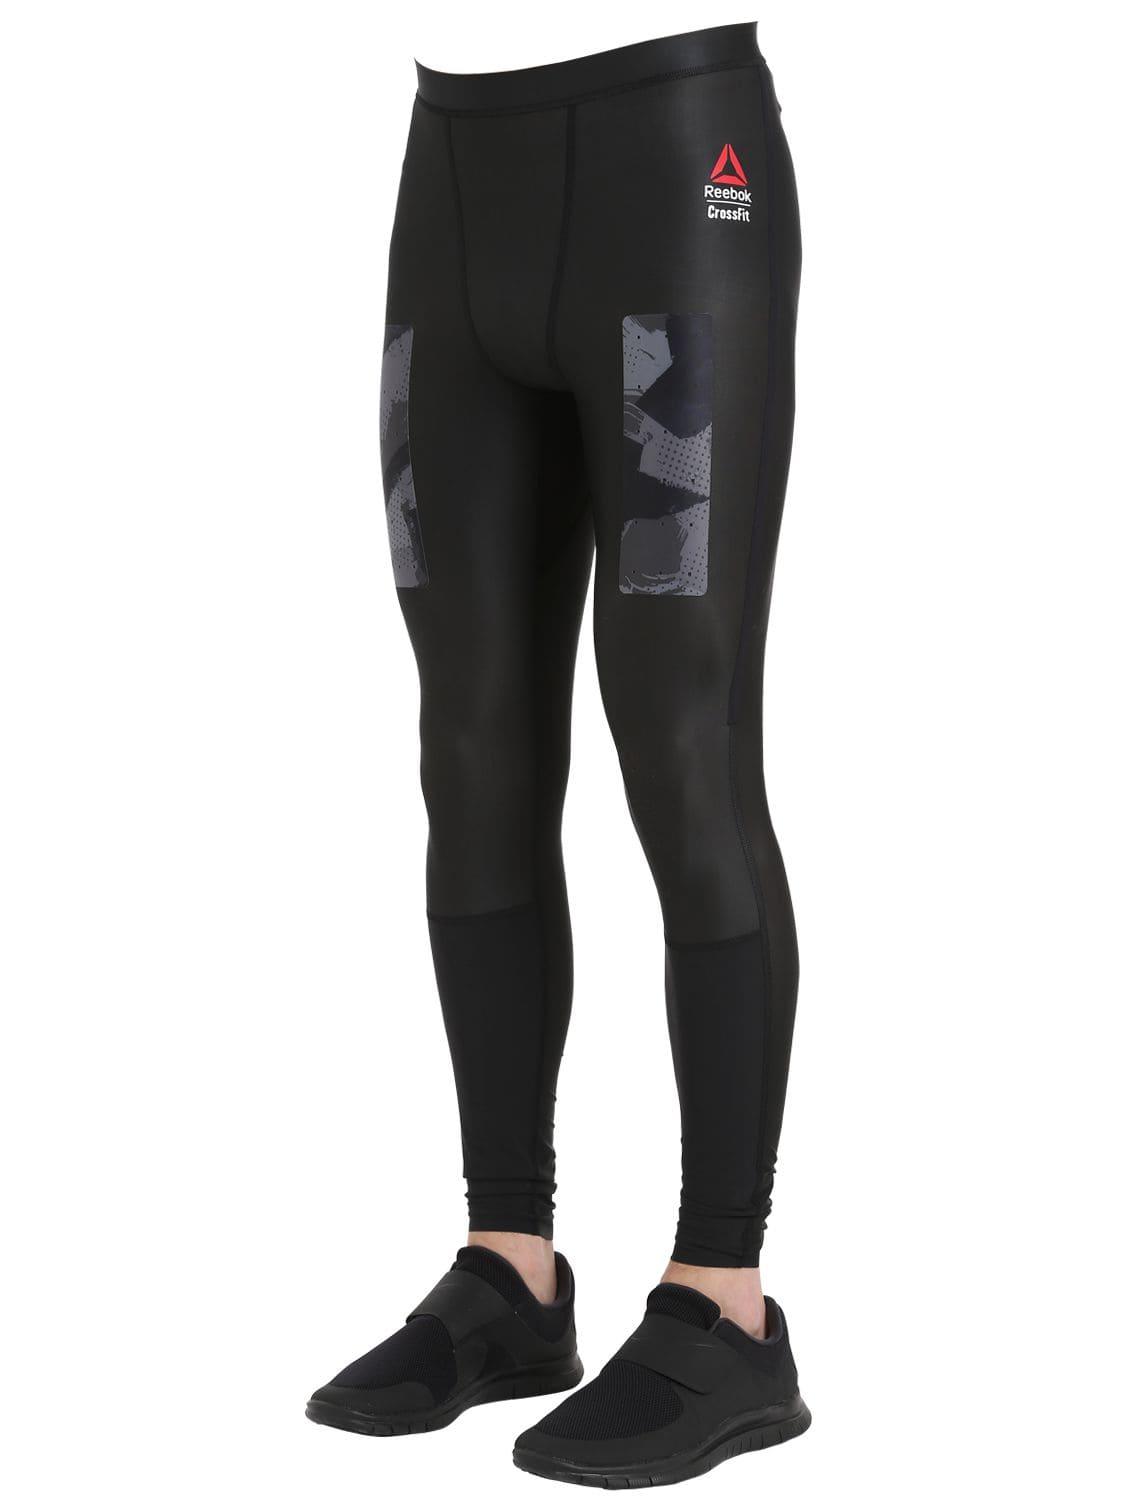 Crossfit Compression Tights Online, SAVE 39% - lutheranems.com